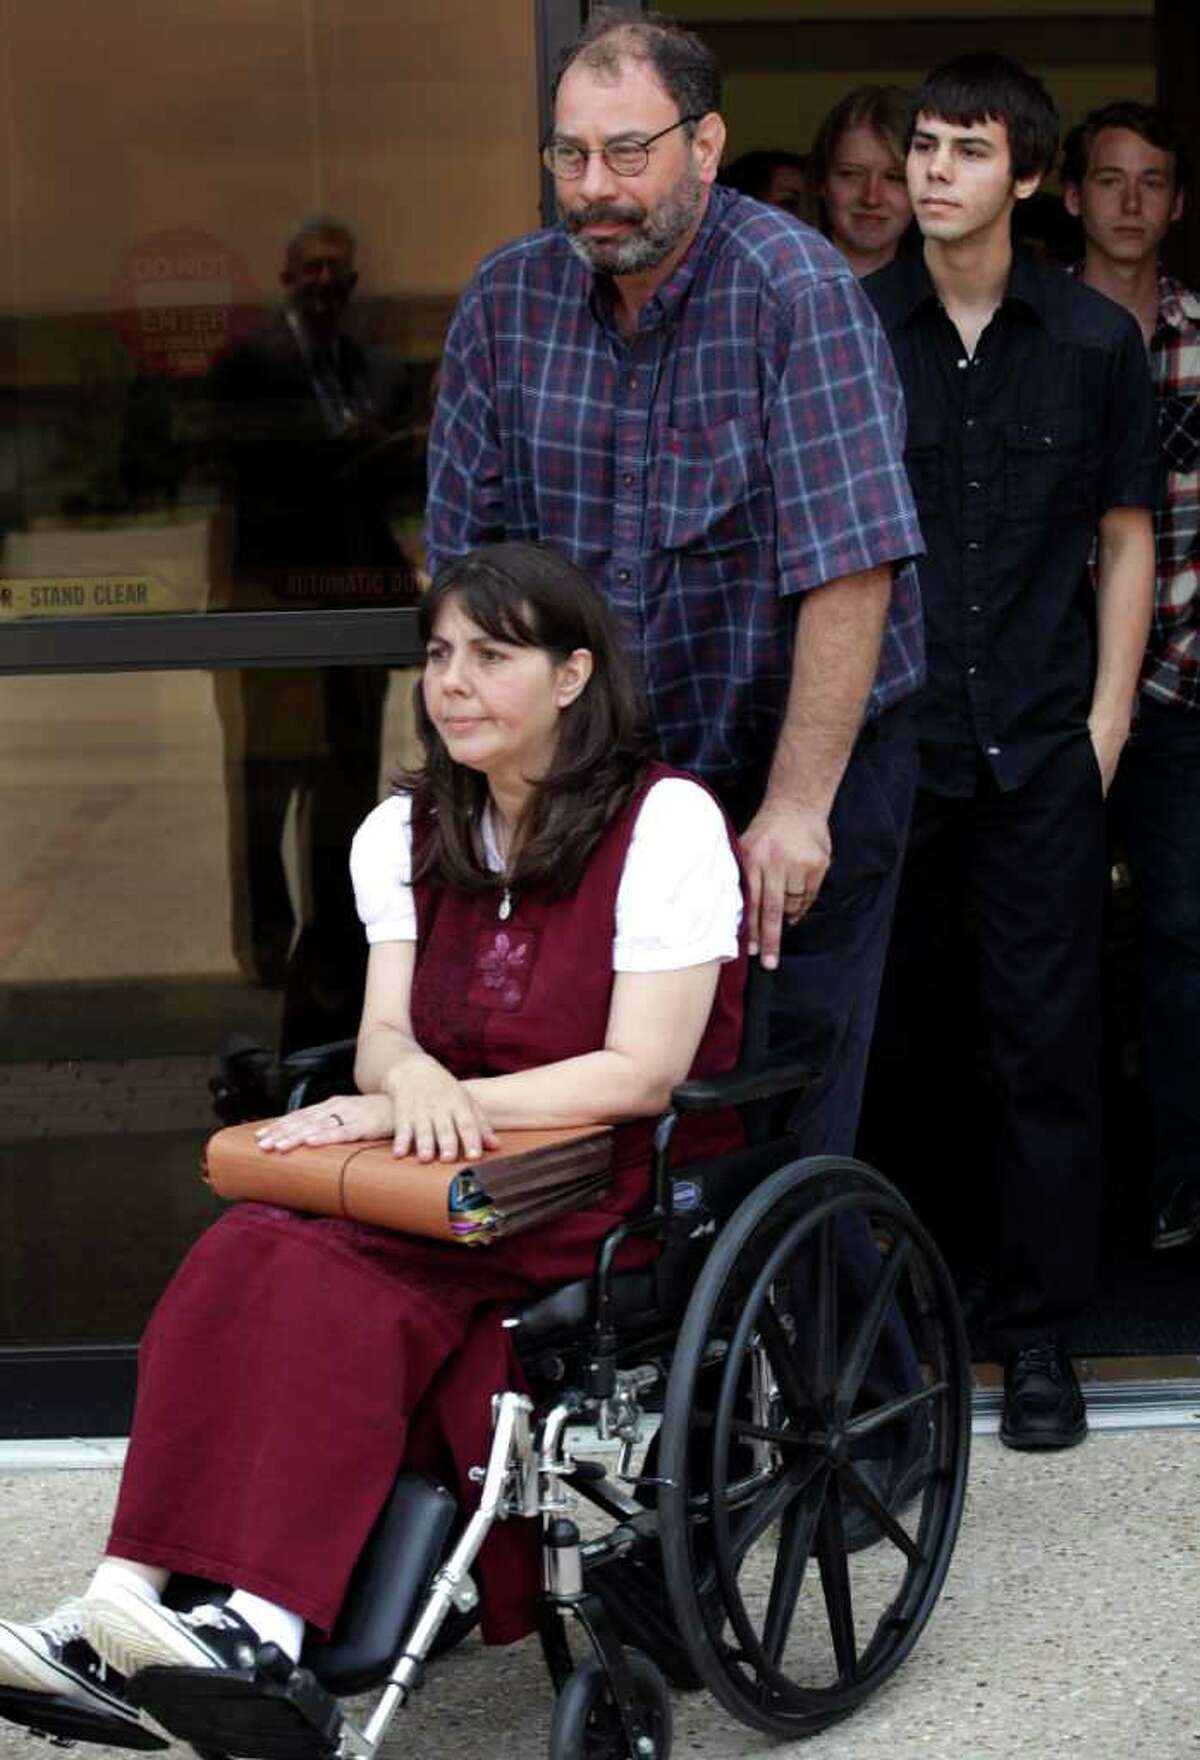 Danny Schultz escorts his wife Christa Schultz followed by their son Corwyn Schultz leave the U.S. Courthouse in San Antonio, May 31, after a hearing in which they are trying to ban the use of prayer during Medina Valley High School's graduation ceremonies this Saturday. Corwyn is in the graduating class.